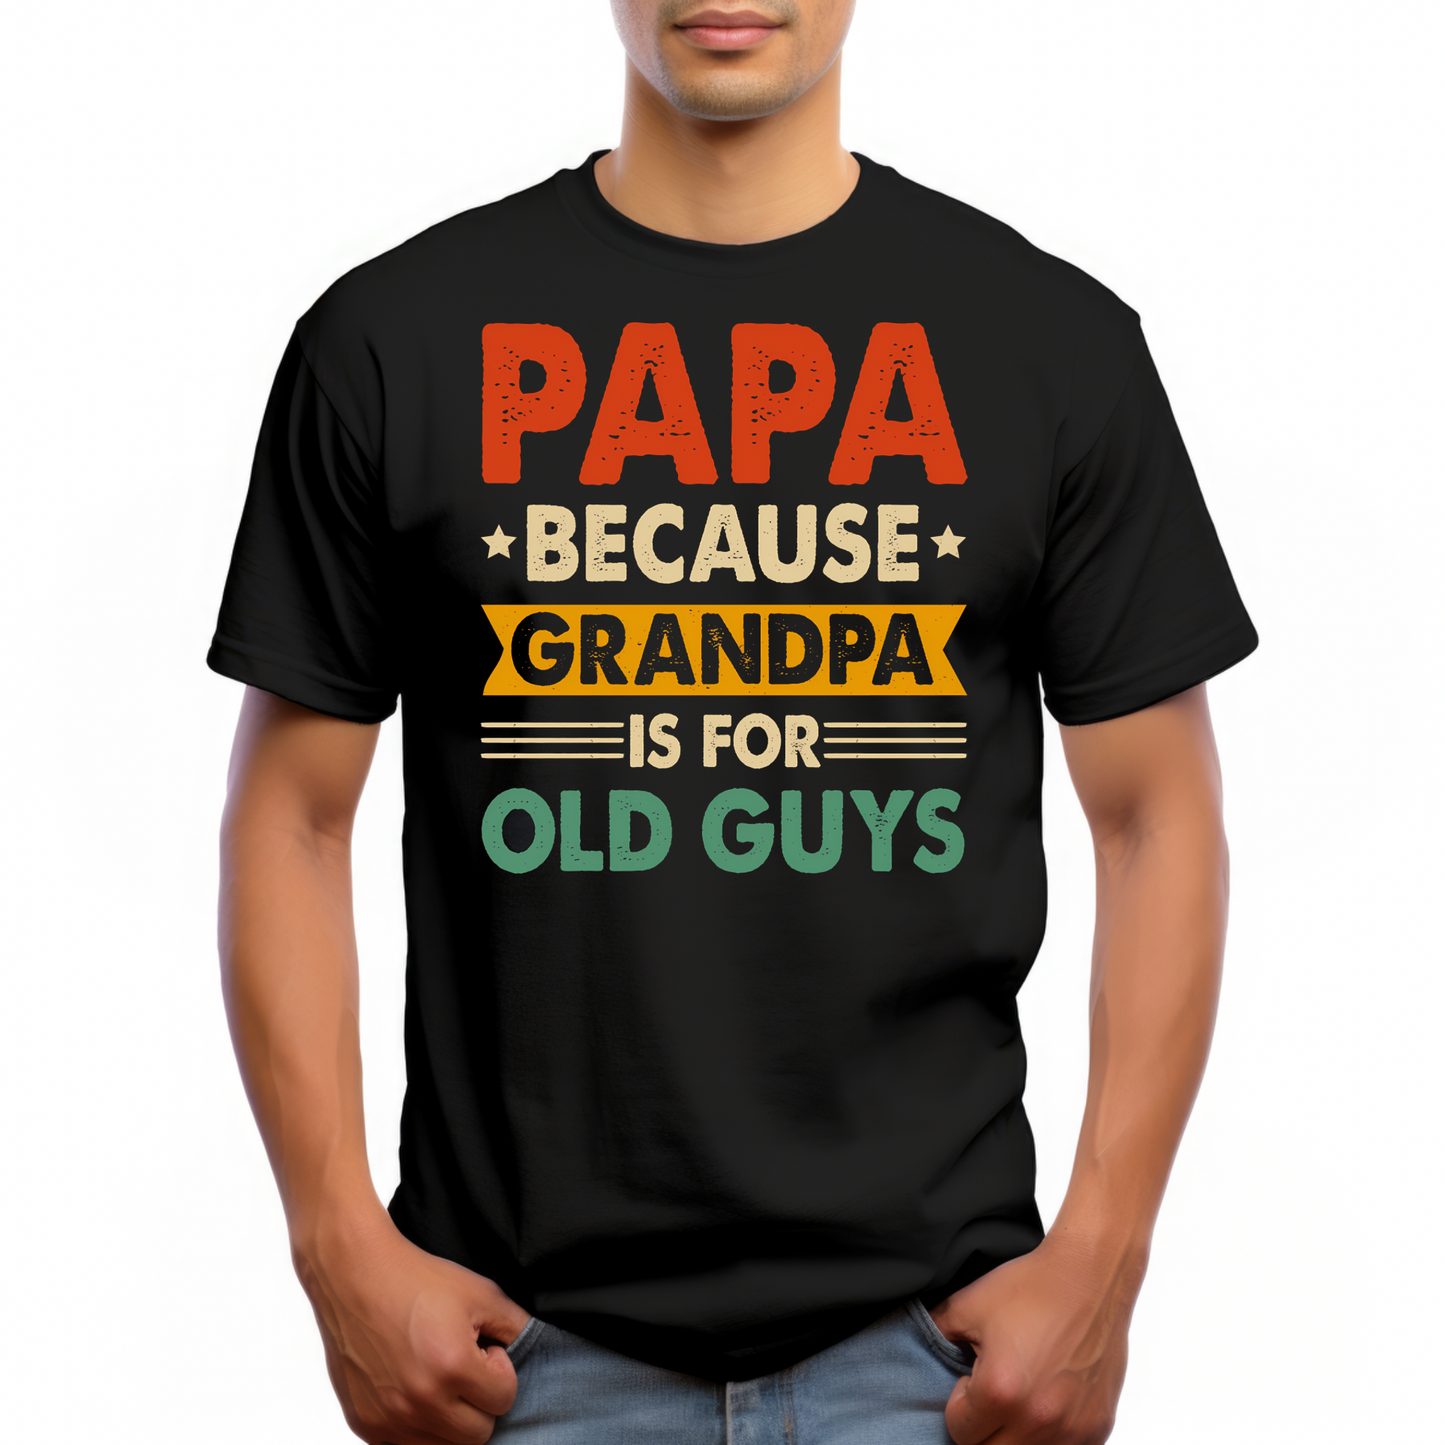 Papa because grandpa is for old guys